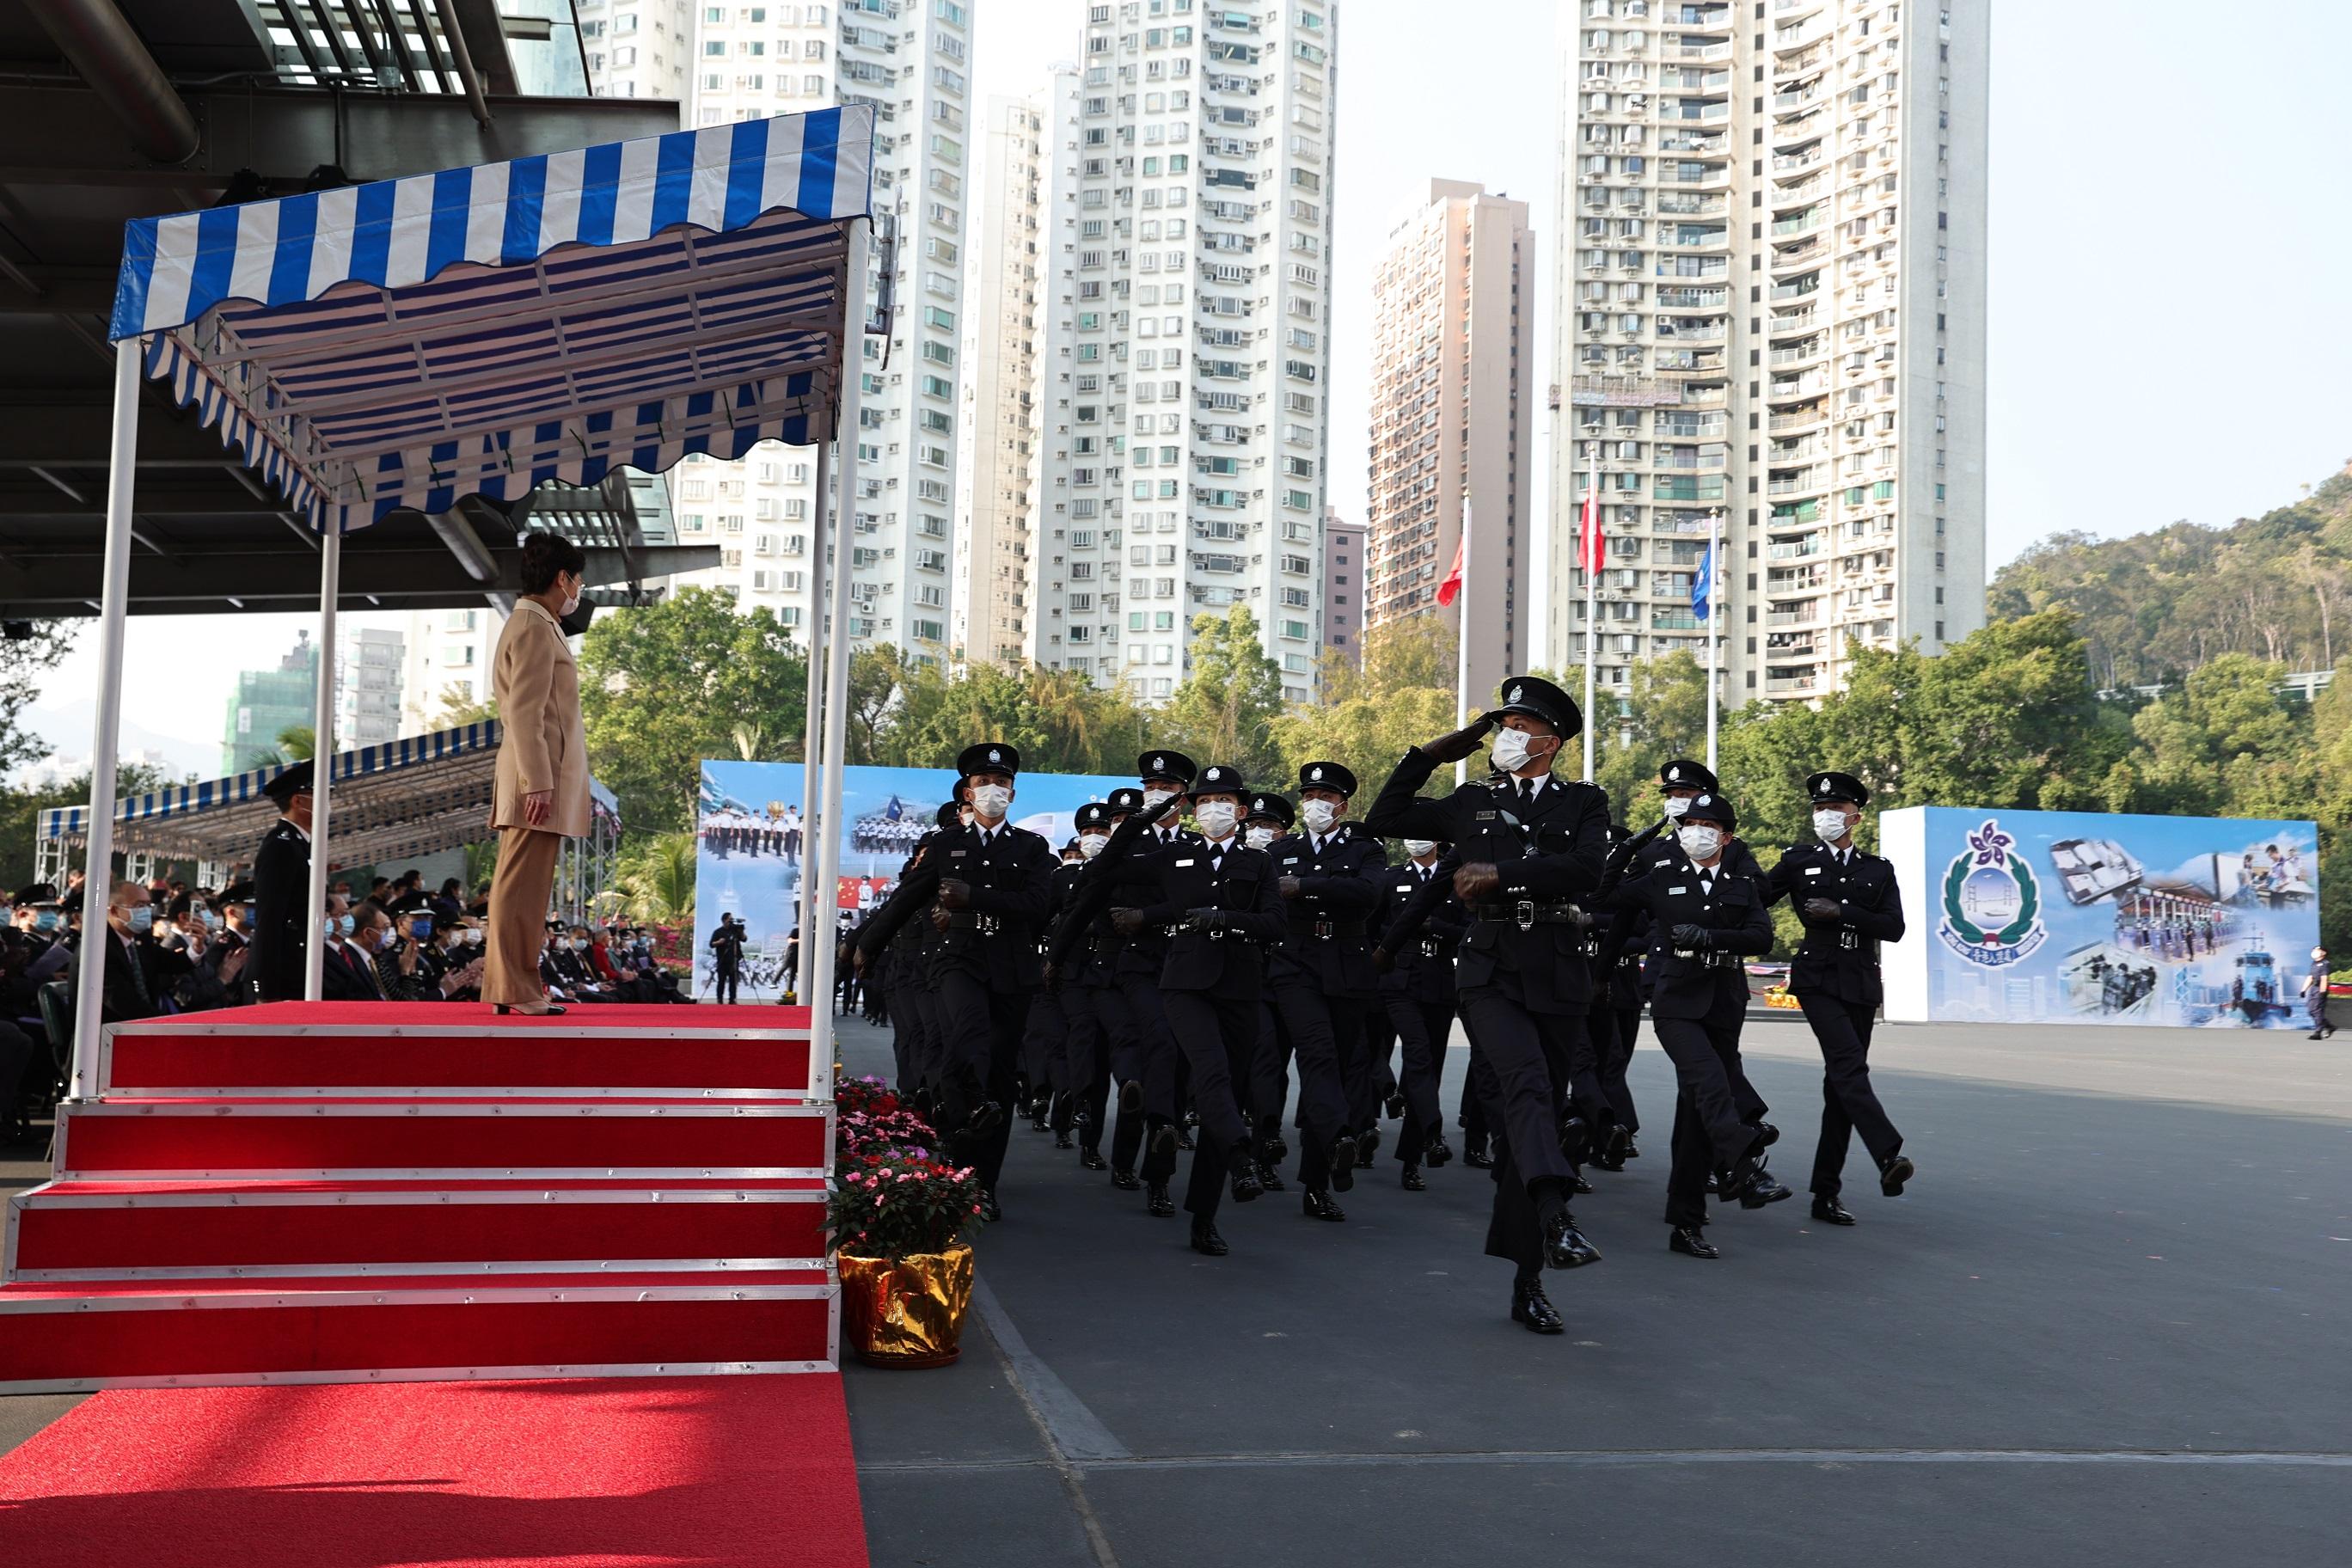 The Immigration Department Passing-out Parade cum 60th Anniversary Grand Parade was held today (December 30). Photo shows passing-out officers marching past the dais in “goose-steps”, a Chinese-style foot drill.